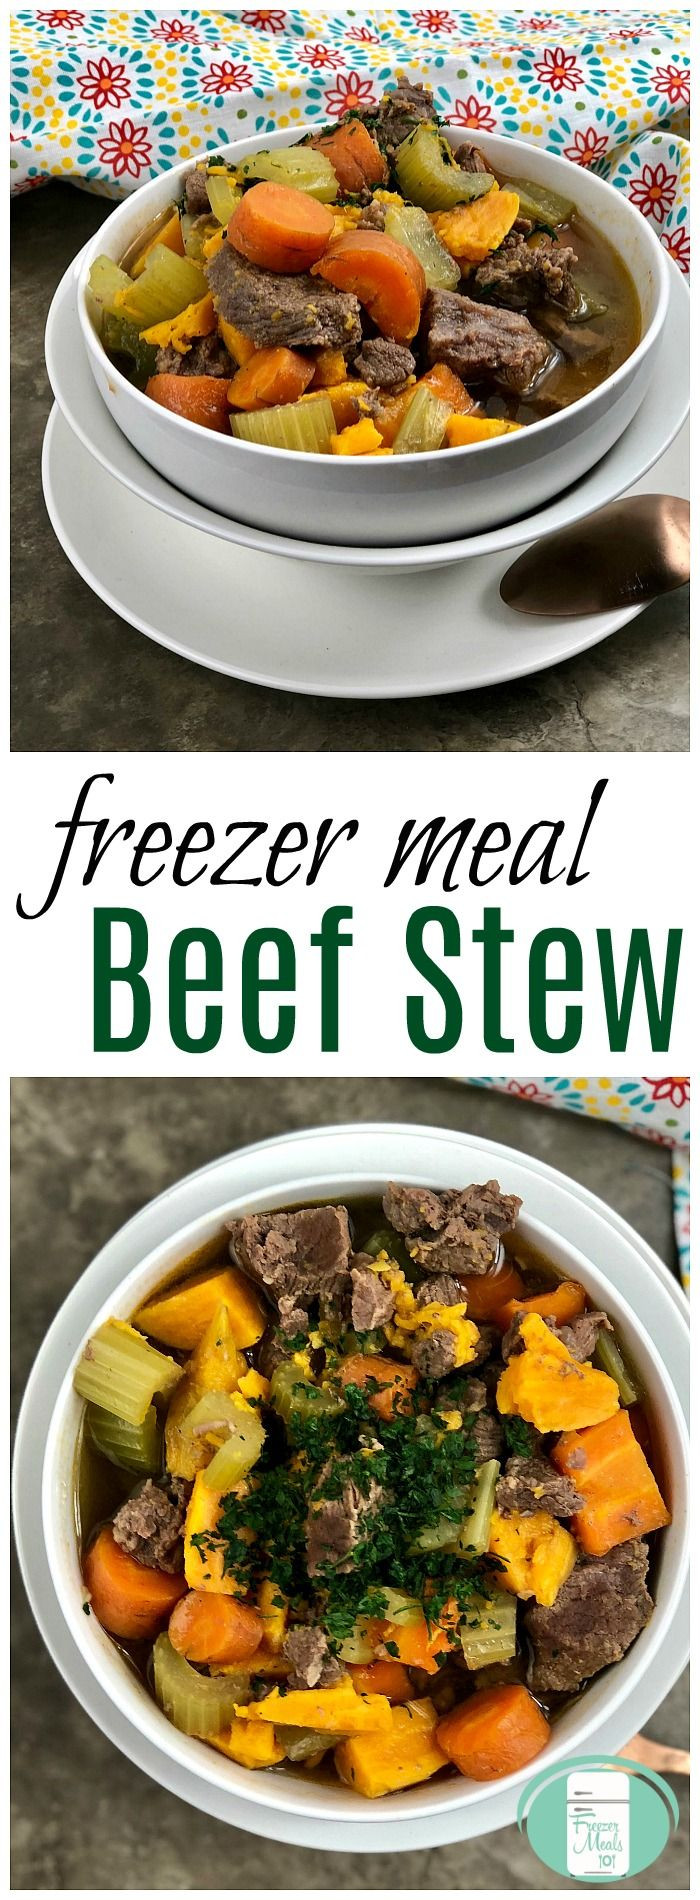 Freezer Beef Stew
 This hearty beef stew recipe can go from the freezer to